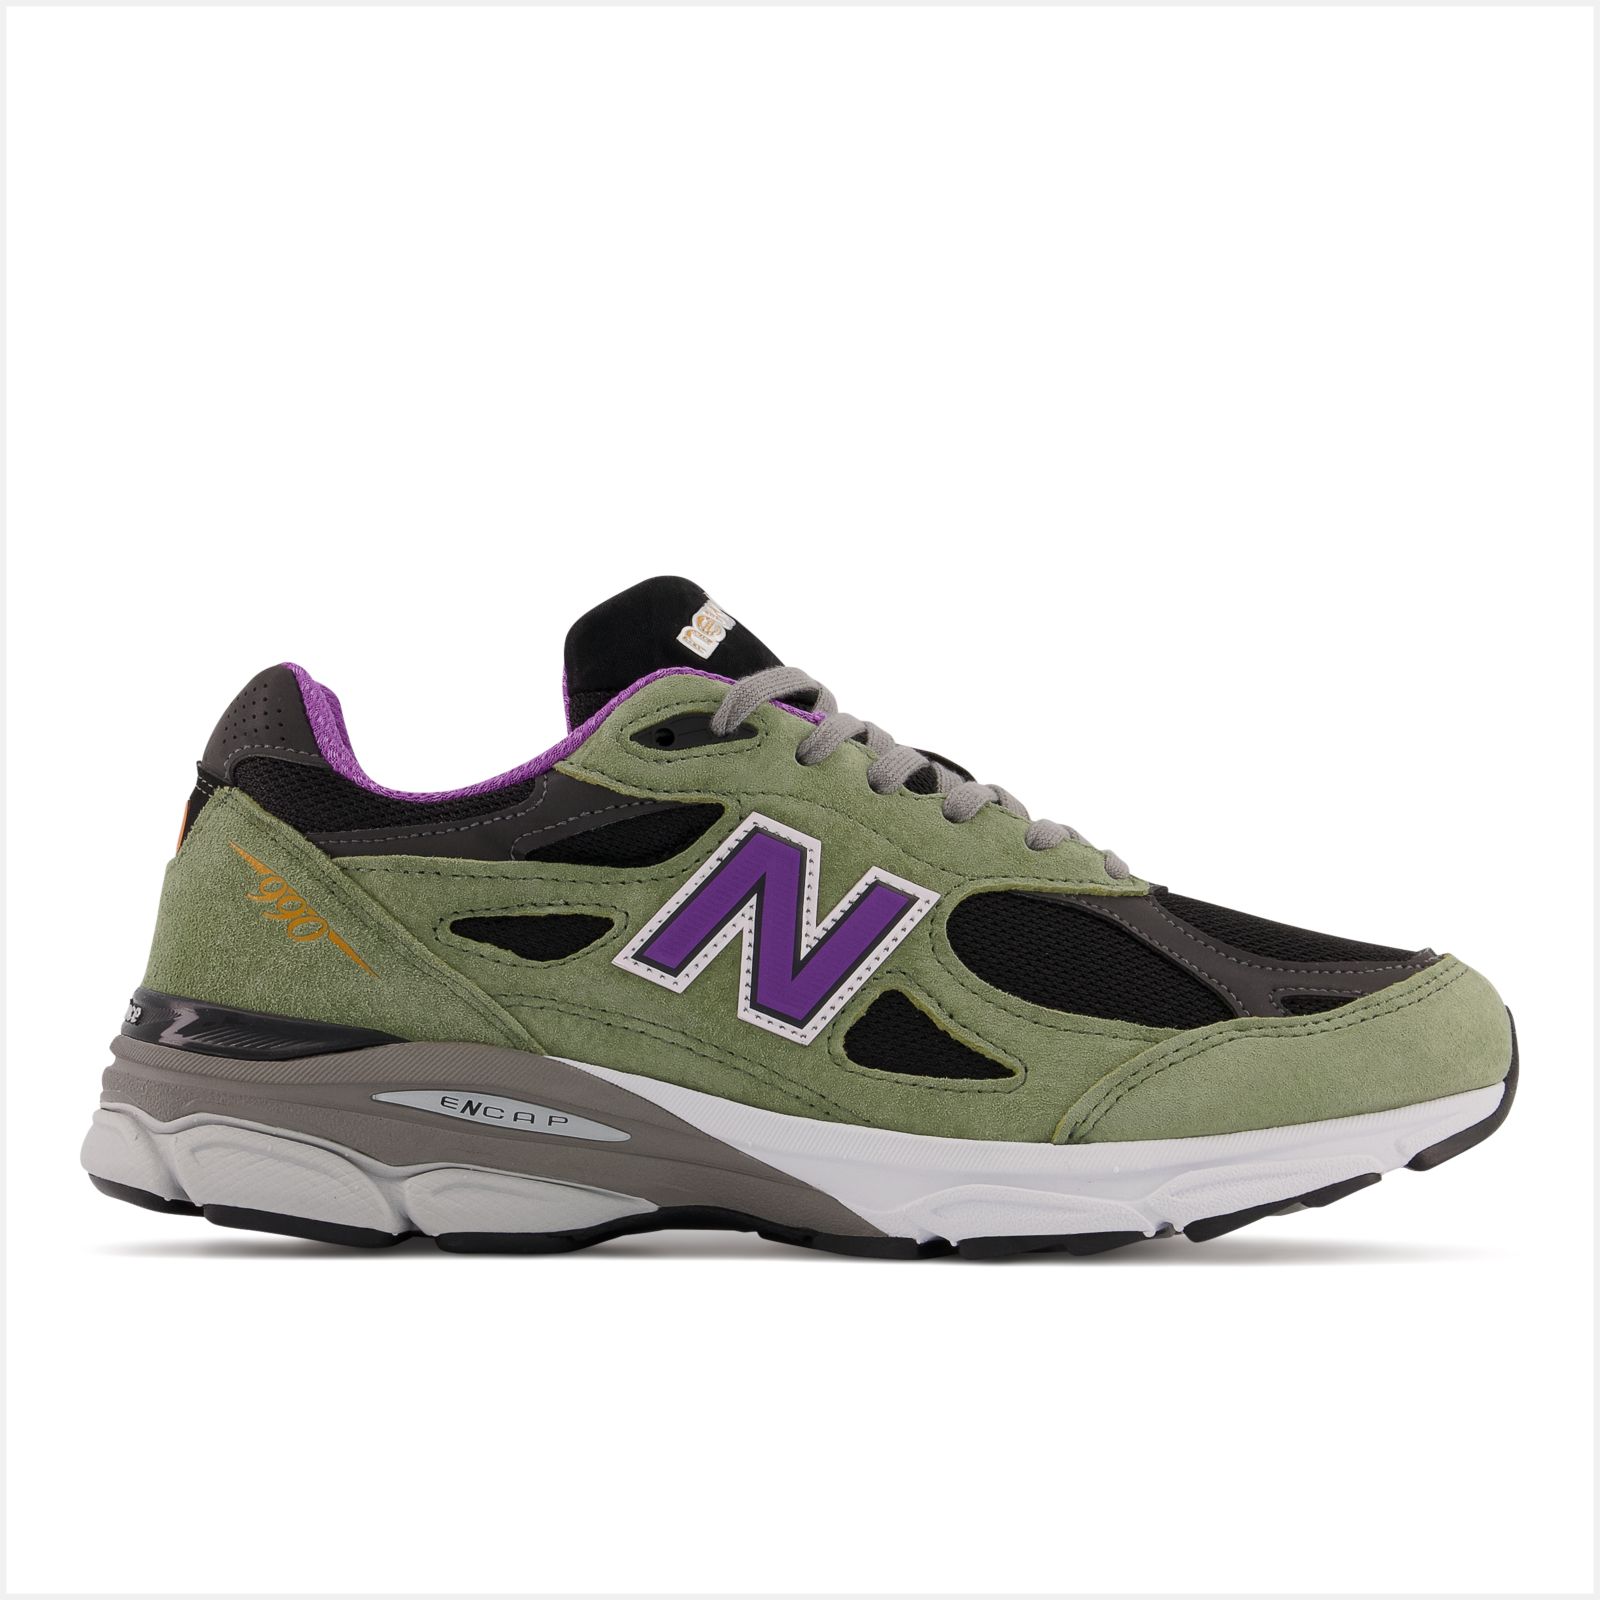 in 990v3 Hombre - New Balance